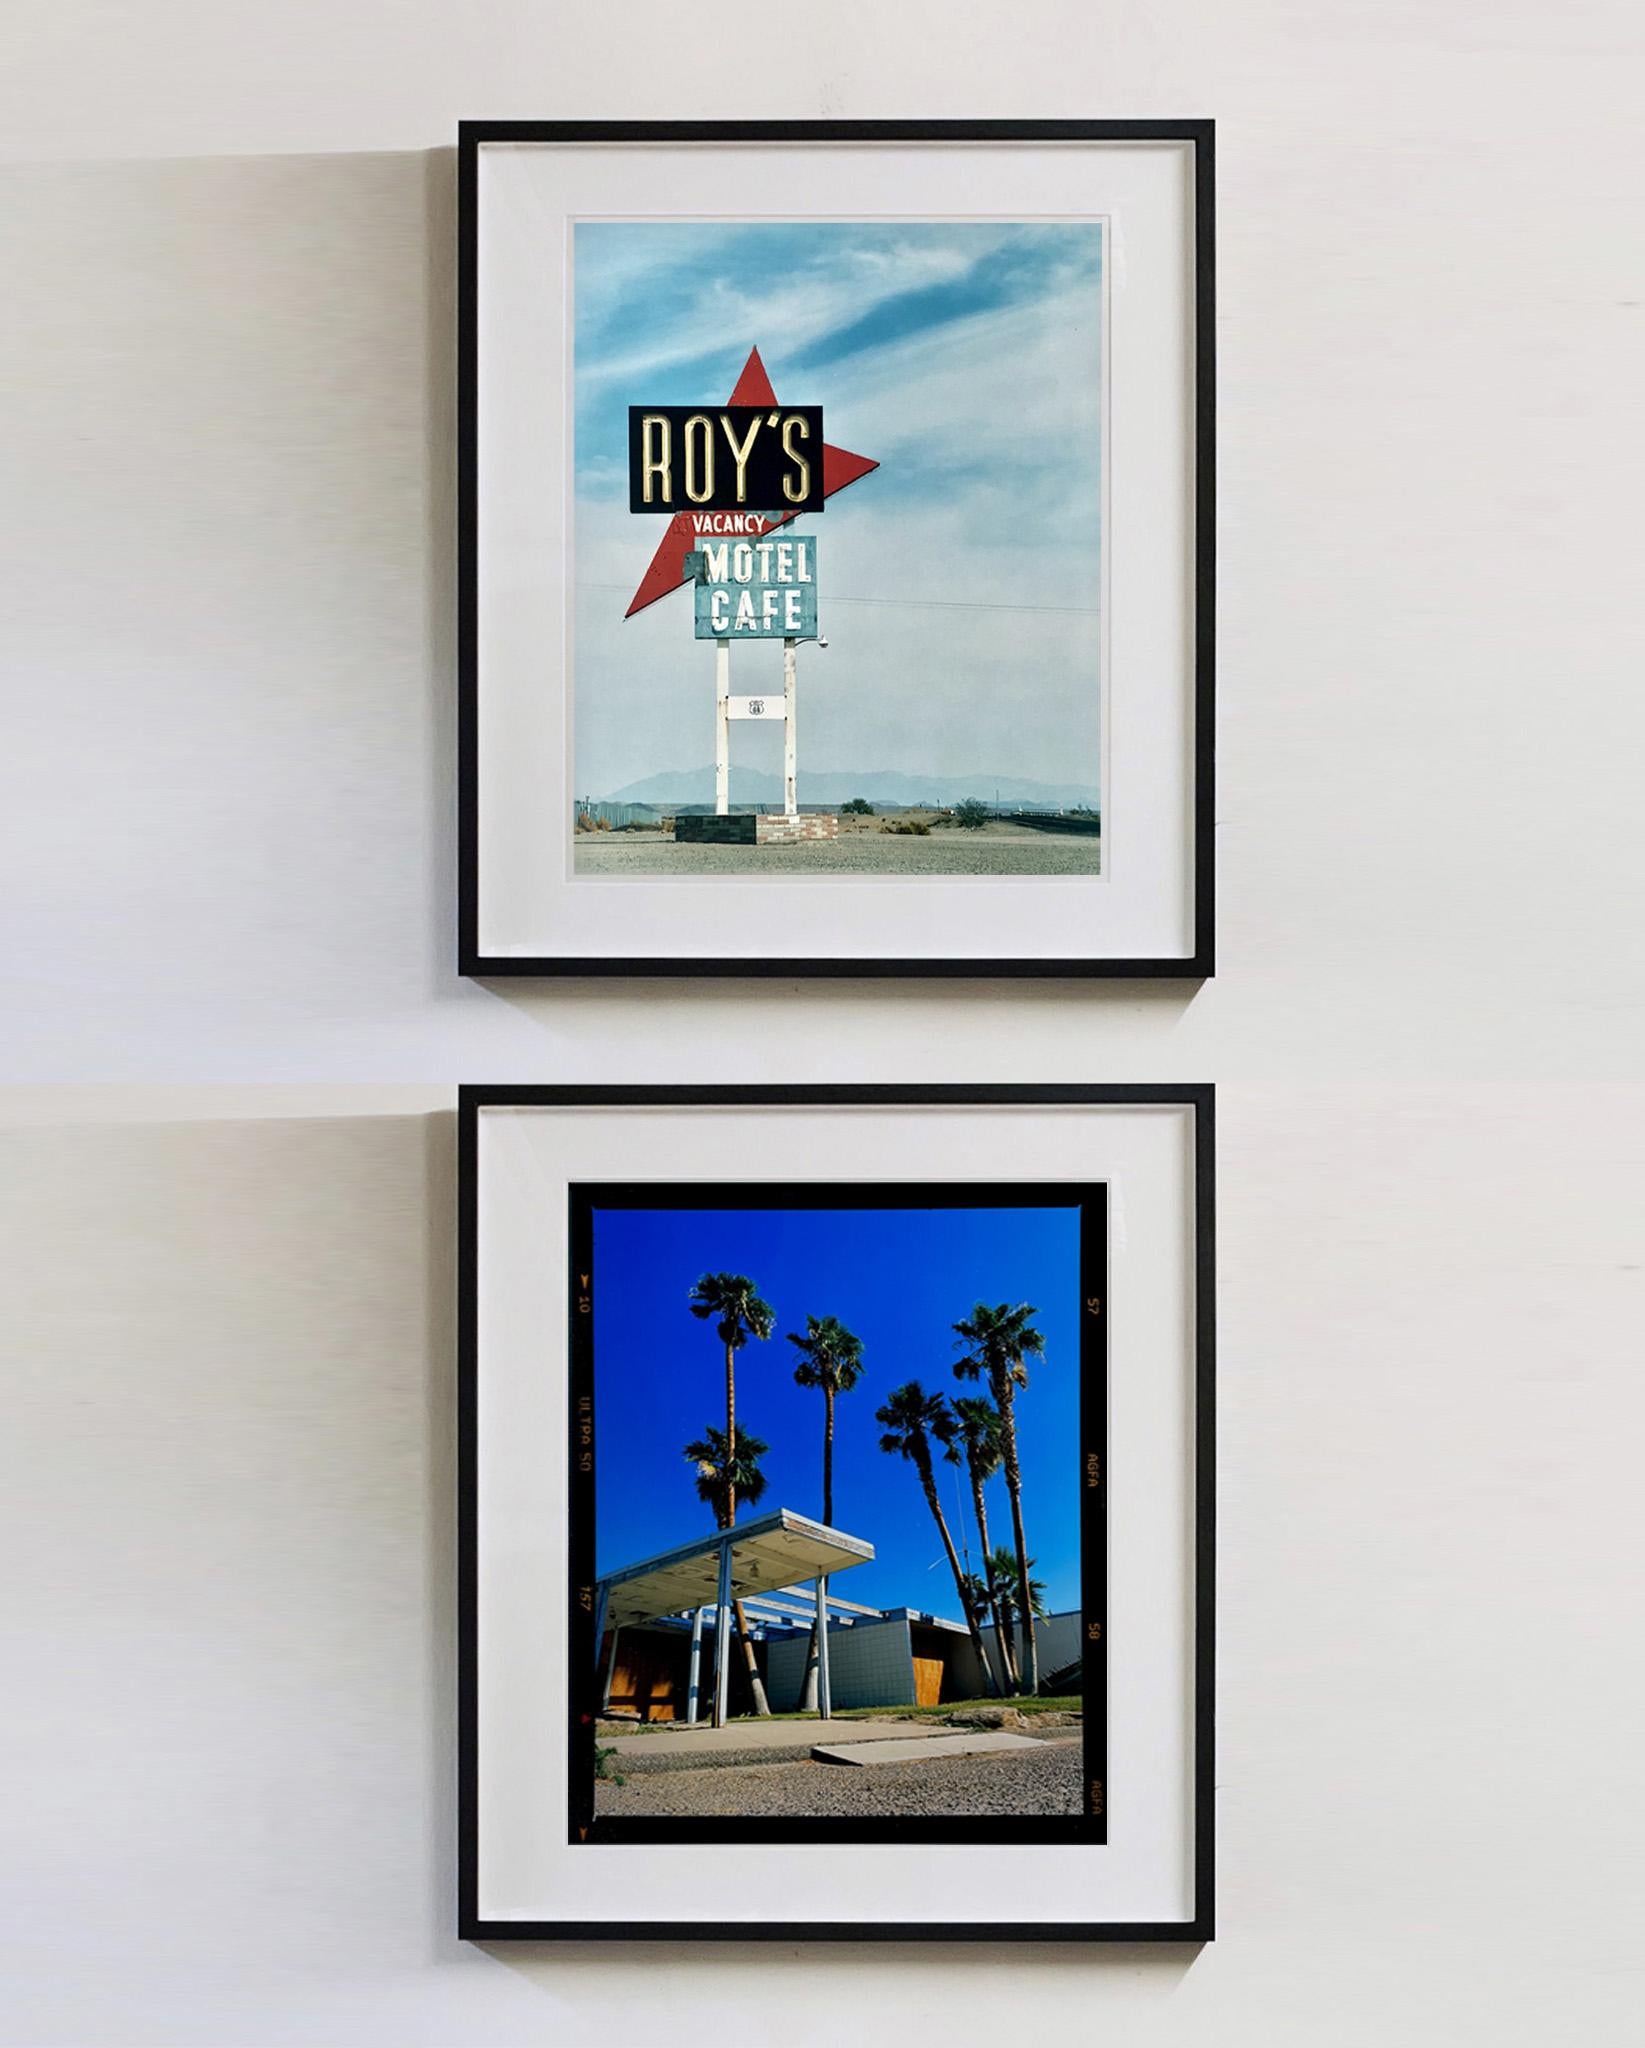 Classic mid-century architecture in this artwork from the Salton Sea California. Rich blues, palm trees with pops of orange create the perfect palette with the Agfa Ultra film rebate.

This artwork is a limited edition of 25 gloss photographic